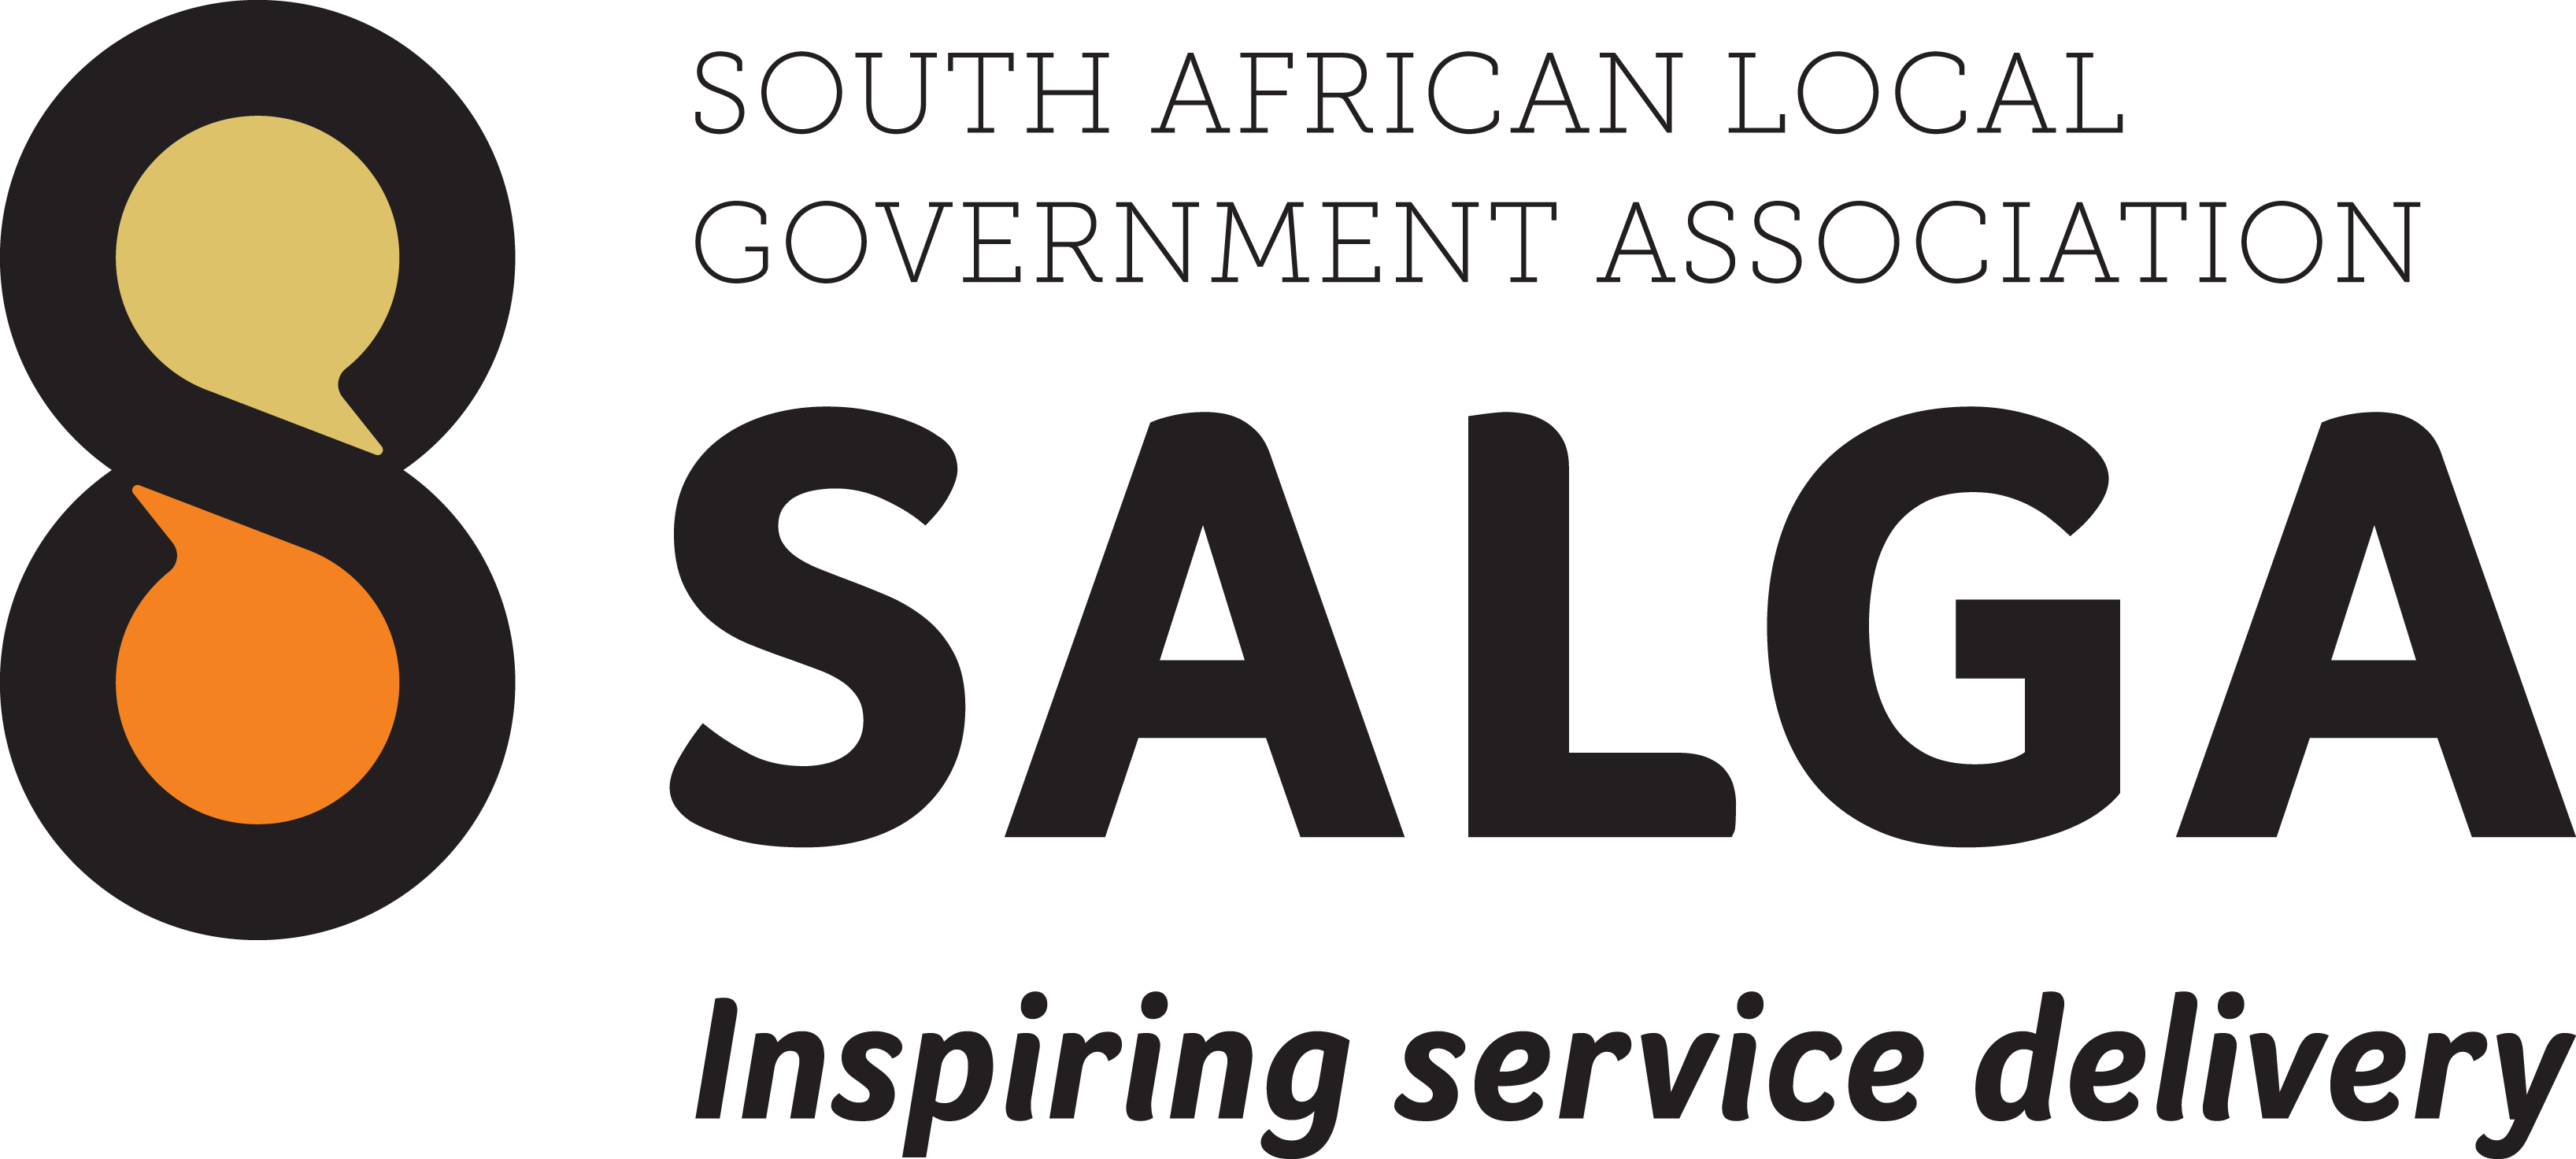 The South African Local Government Association